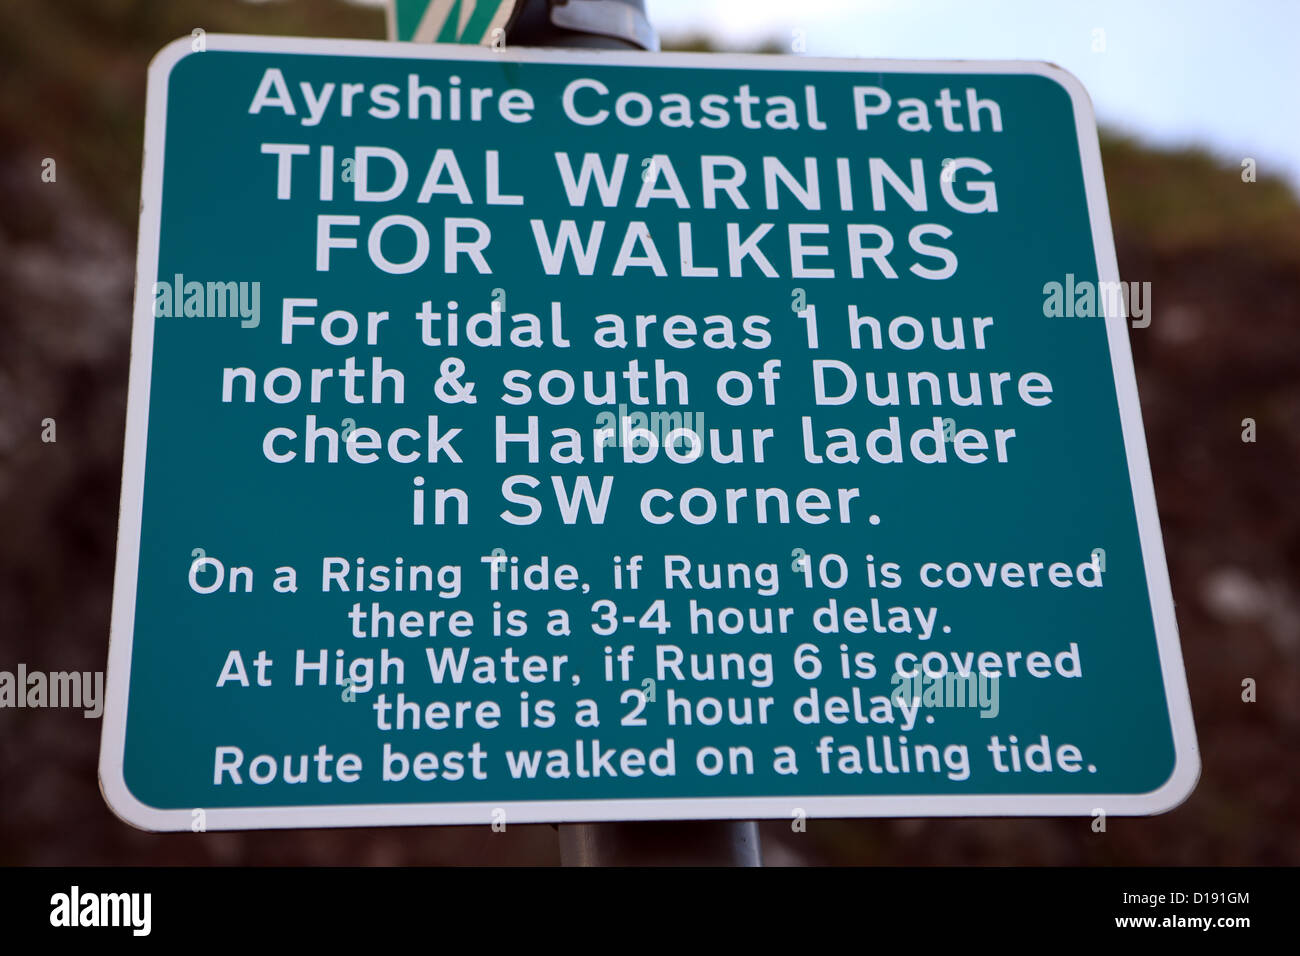 Tidal warning for walkers sign in the Ayrshire coastal town of Dunure Stock Photo